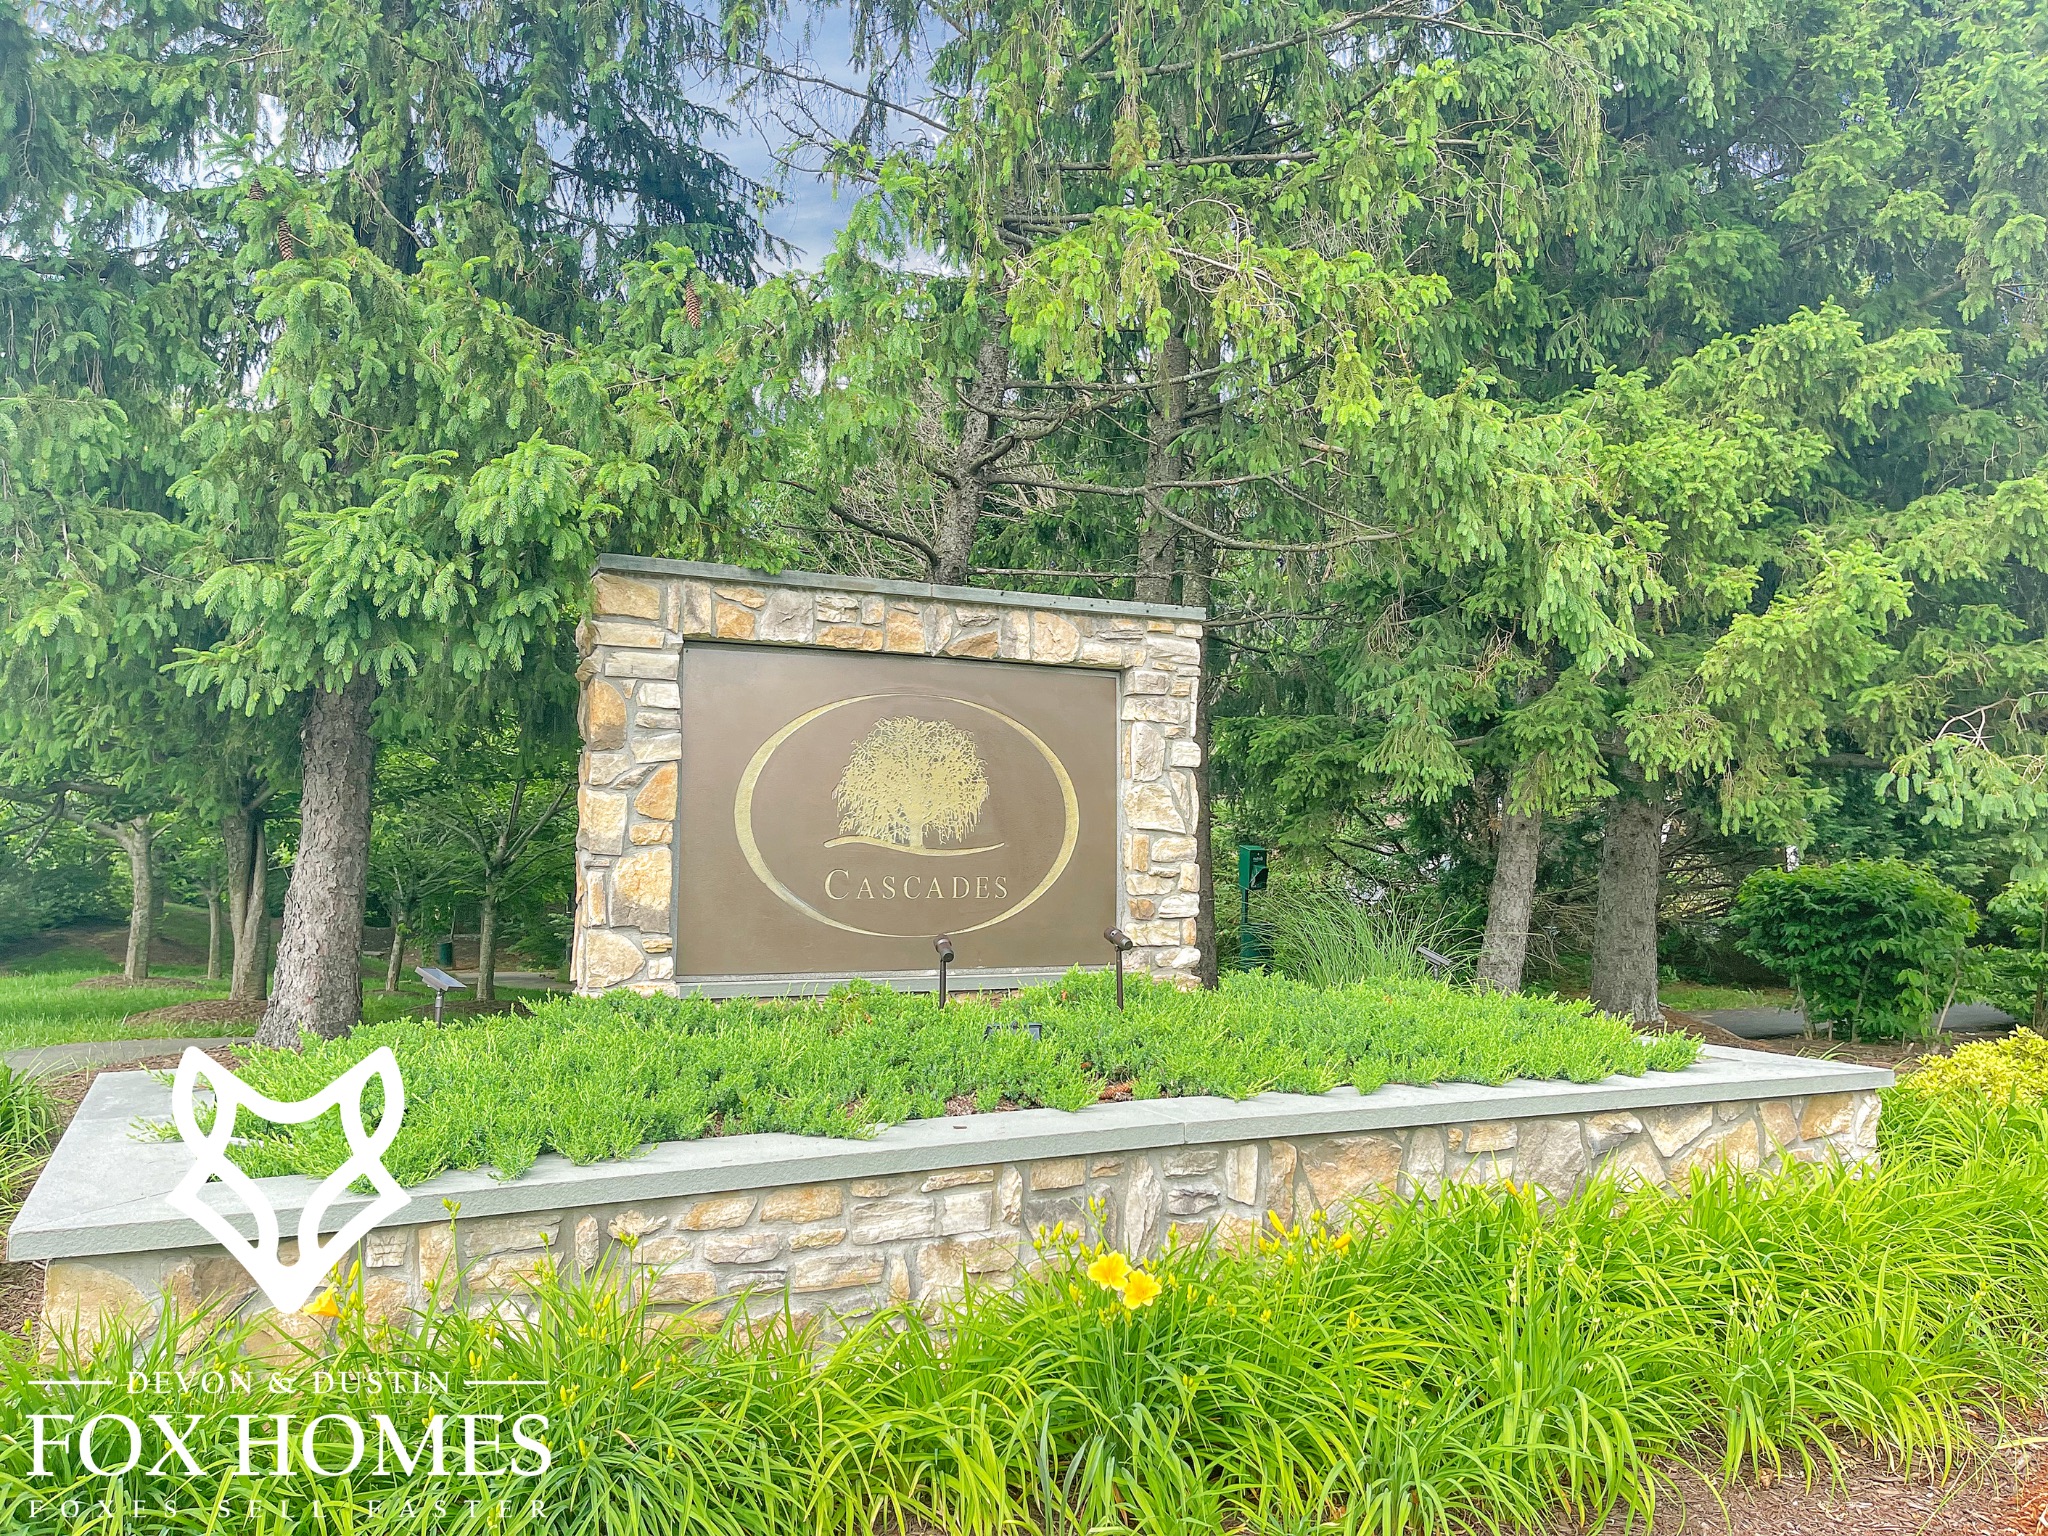 Homes-For-Sale-In-Cascades-Sterling-VA-District-Devon-and-Dustin-Fox-Fox-Homes-Team-Cascade-Signage